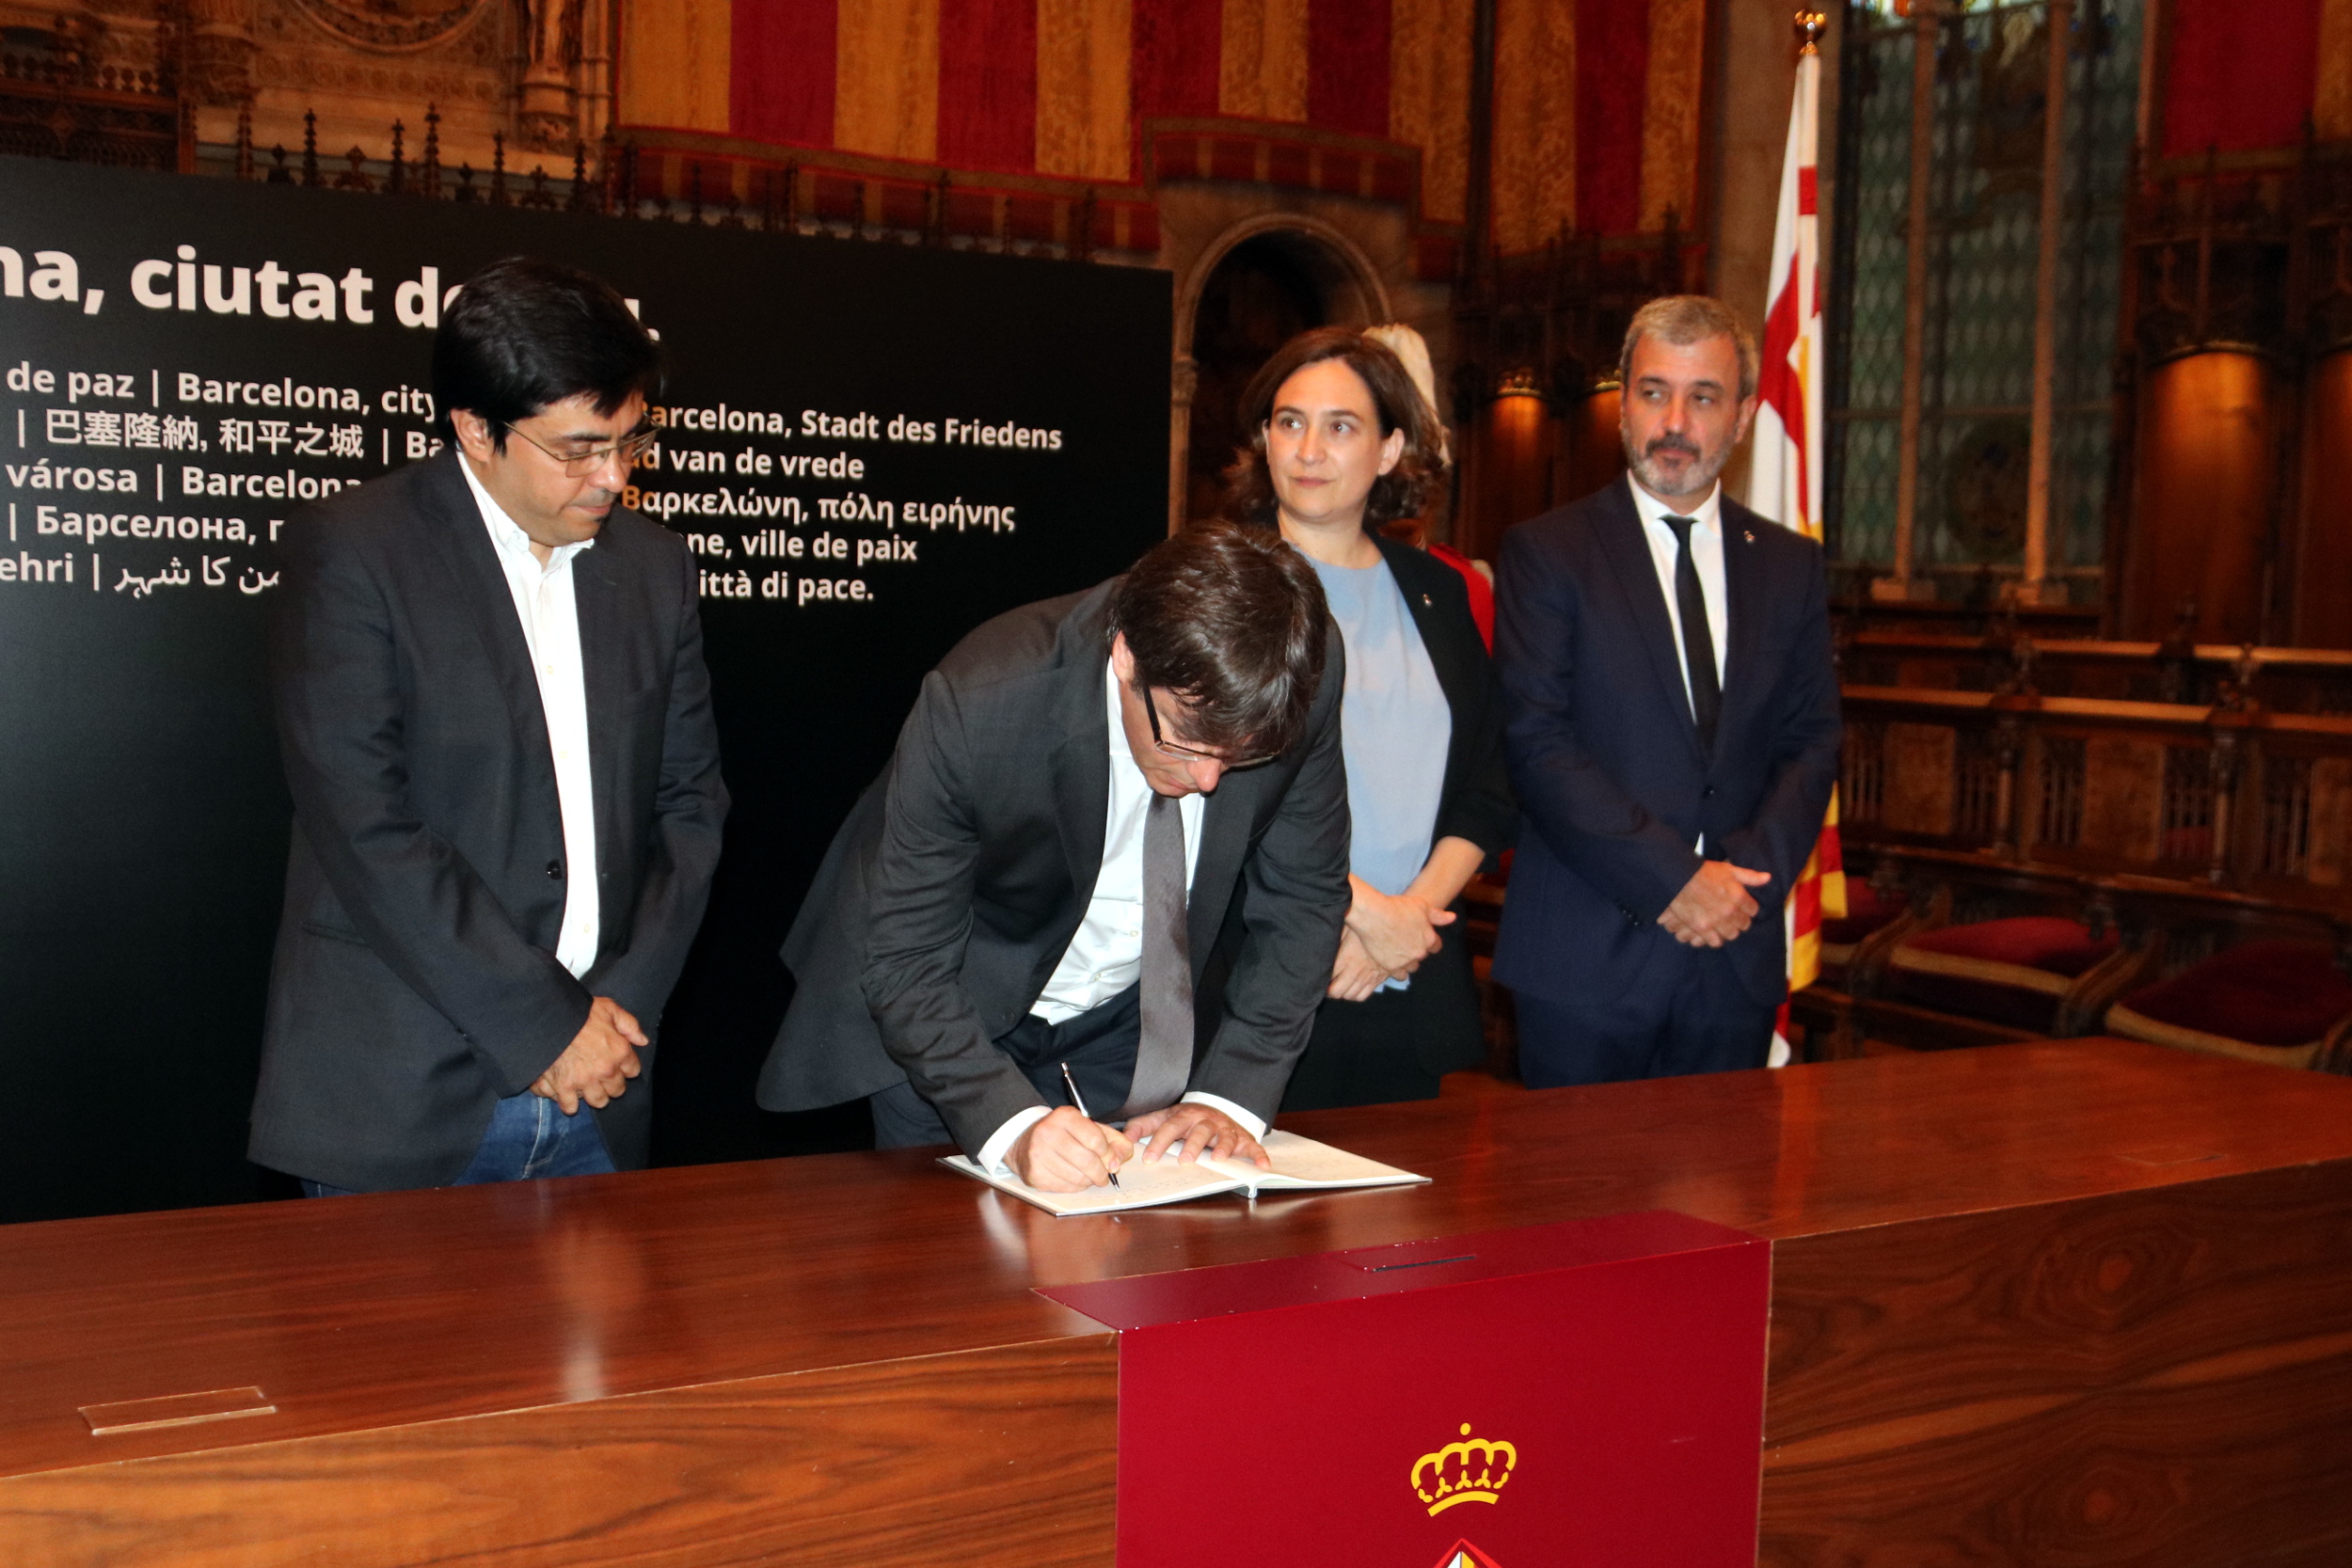 Catalan president, Carles Puigdemont, signing the condolence book in Barcelona city hall